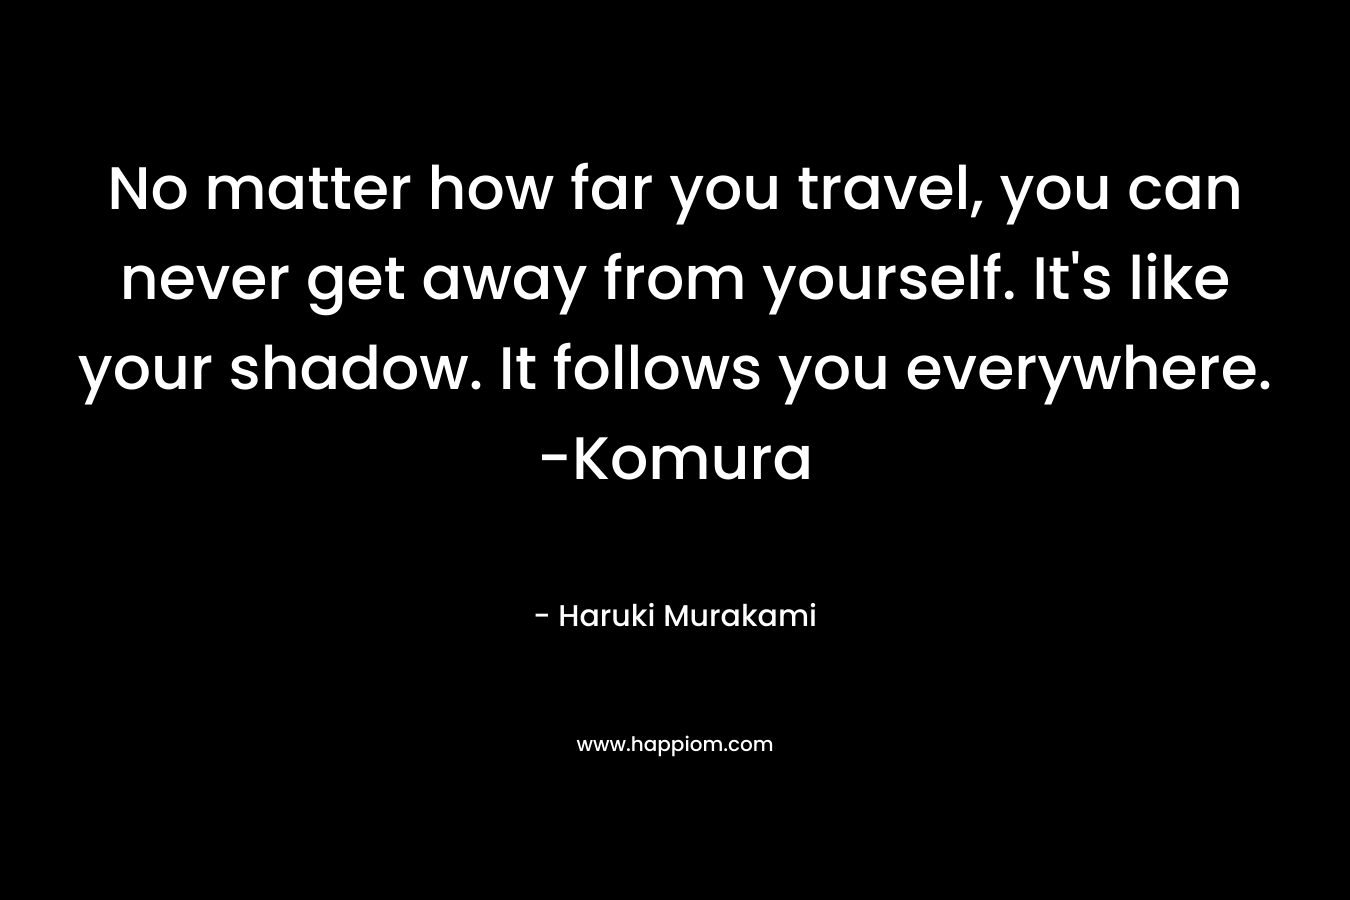 No matter how far you travel, you can never get away from yourself. It's like your shadow. It follows you everywhere. -Komura